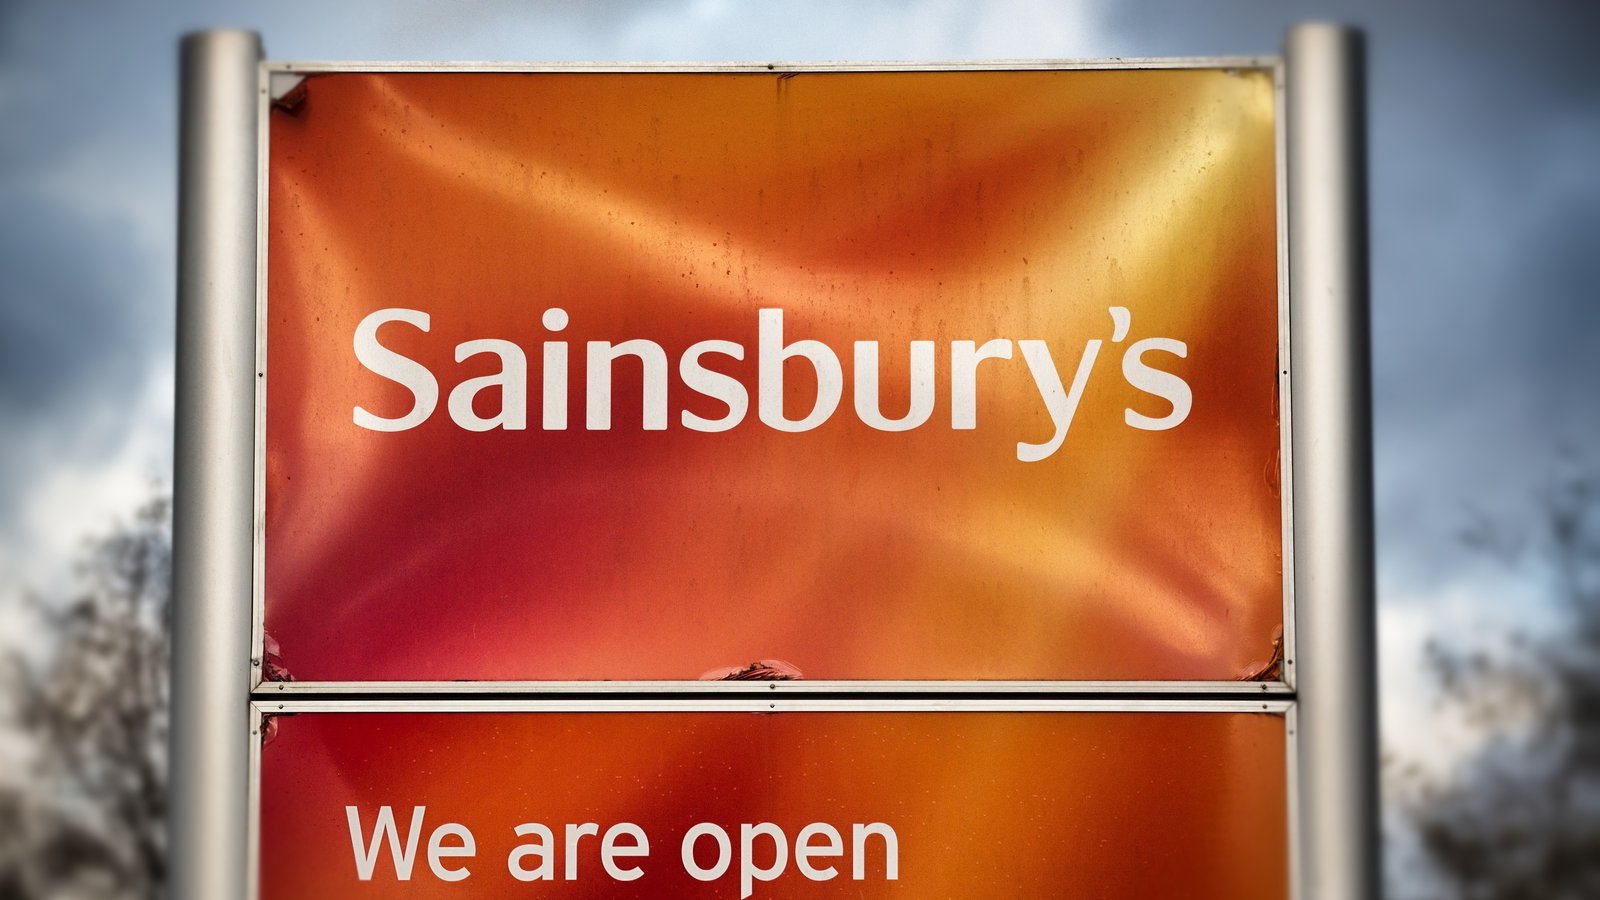 Sainsbury's-Microsoft deal to use AI for data insights